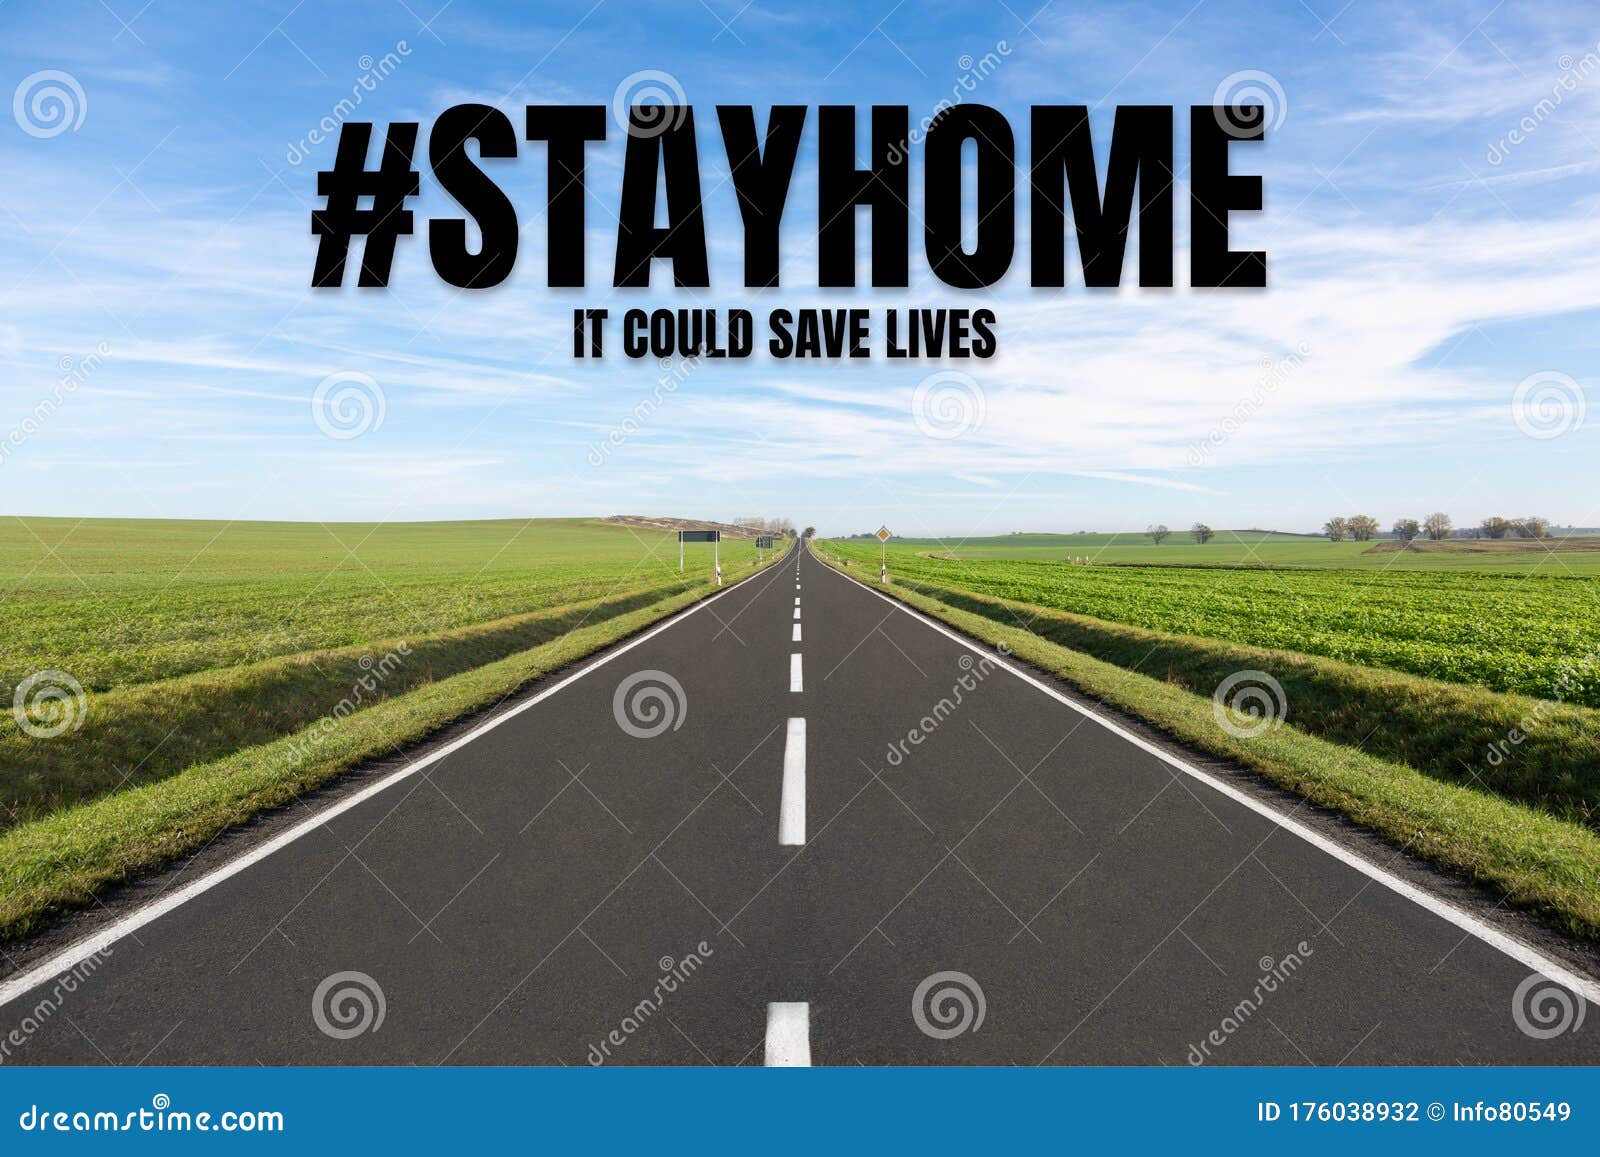 #stayhome, it could save lives message